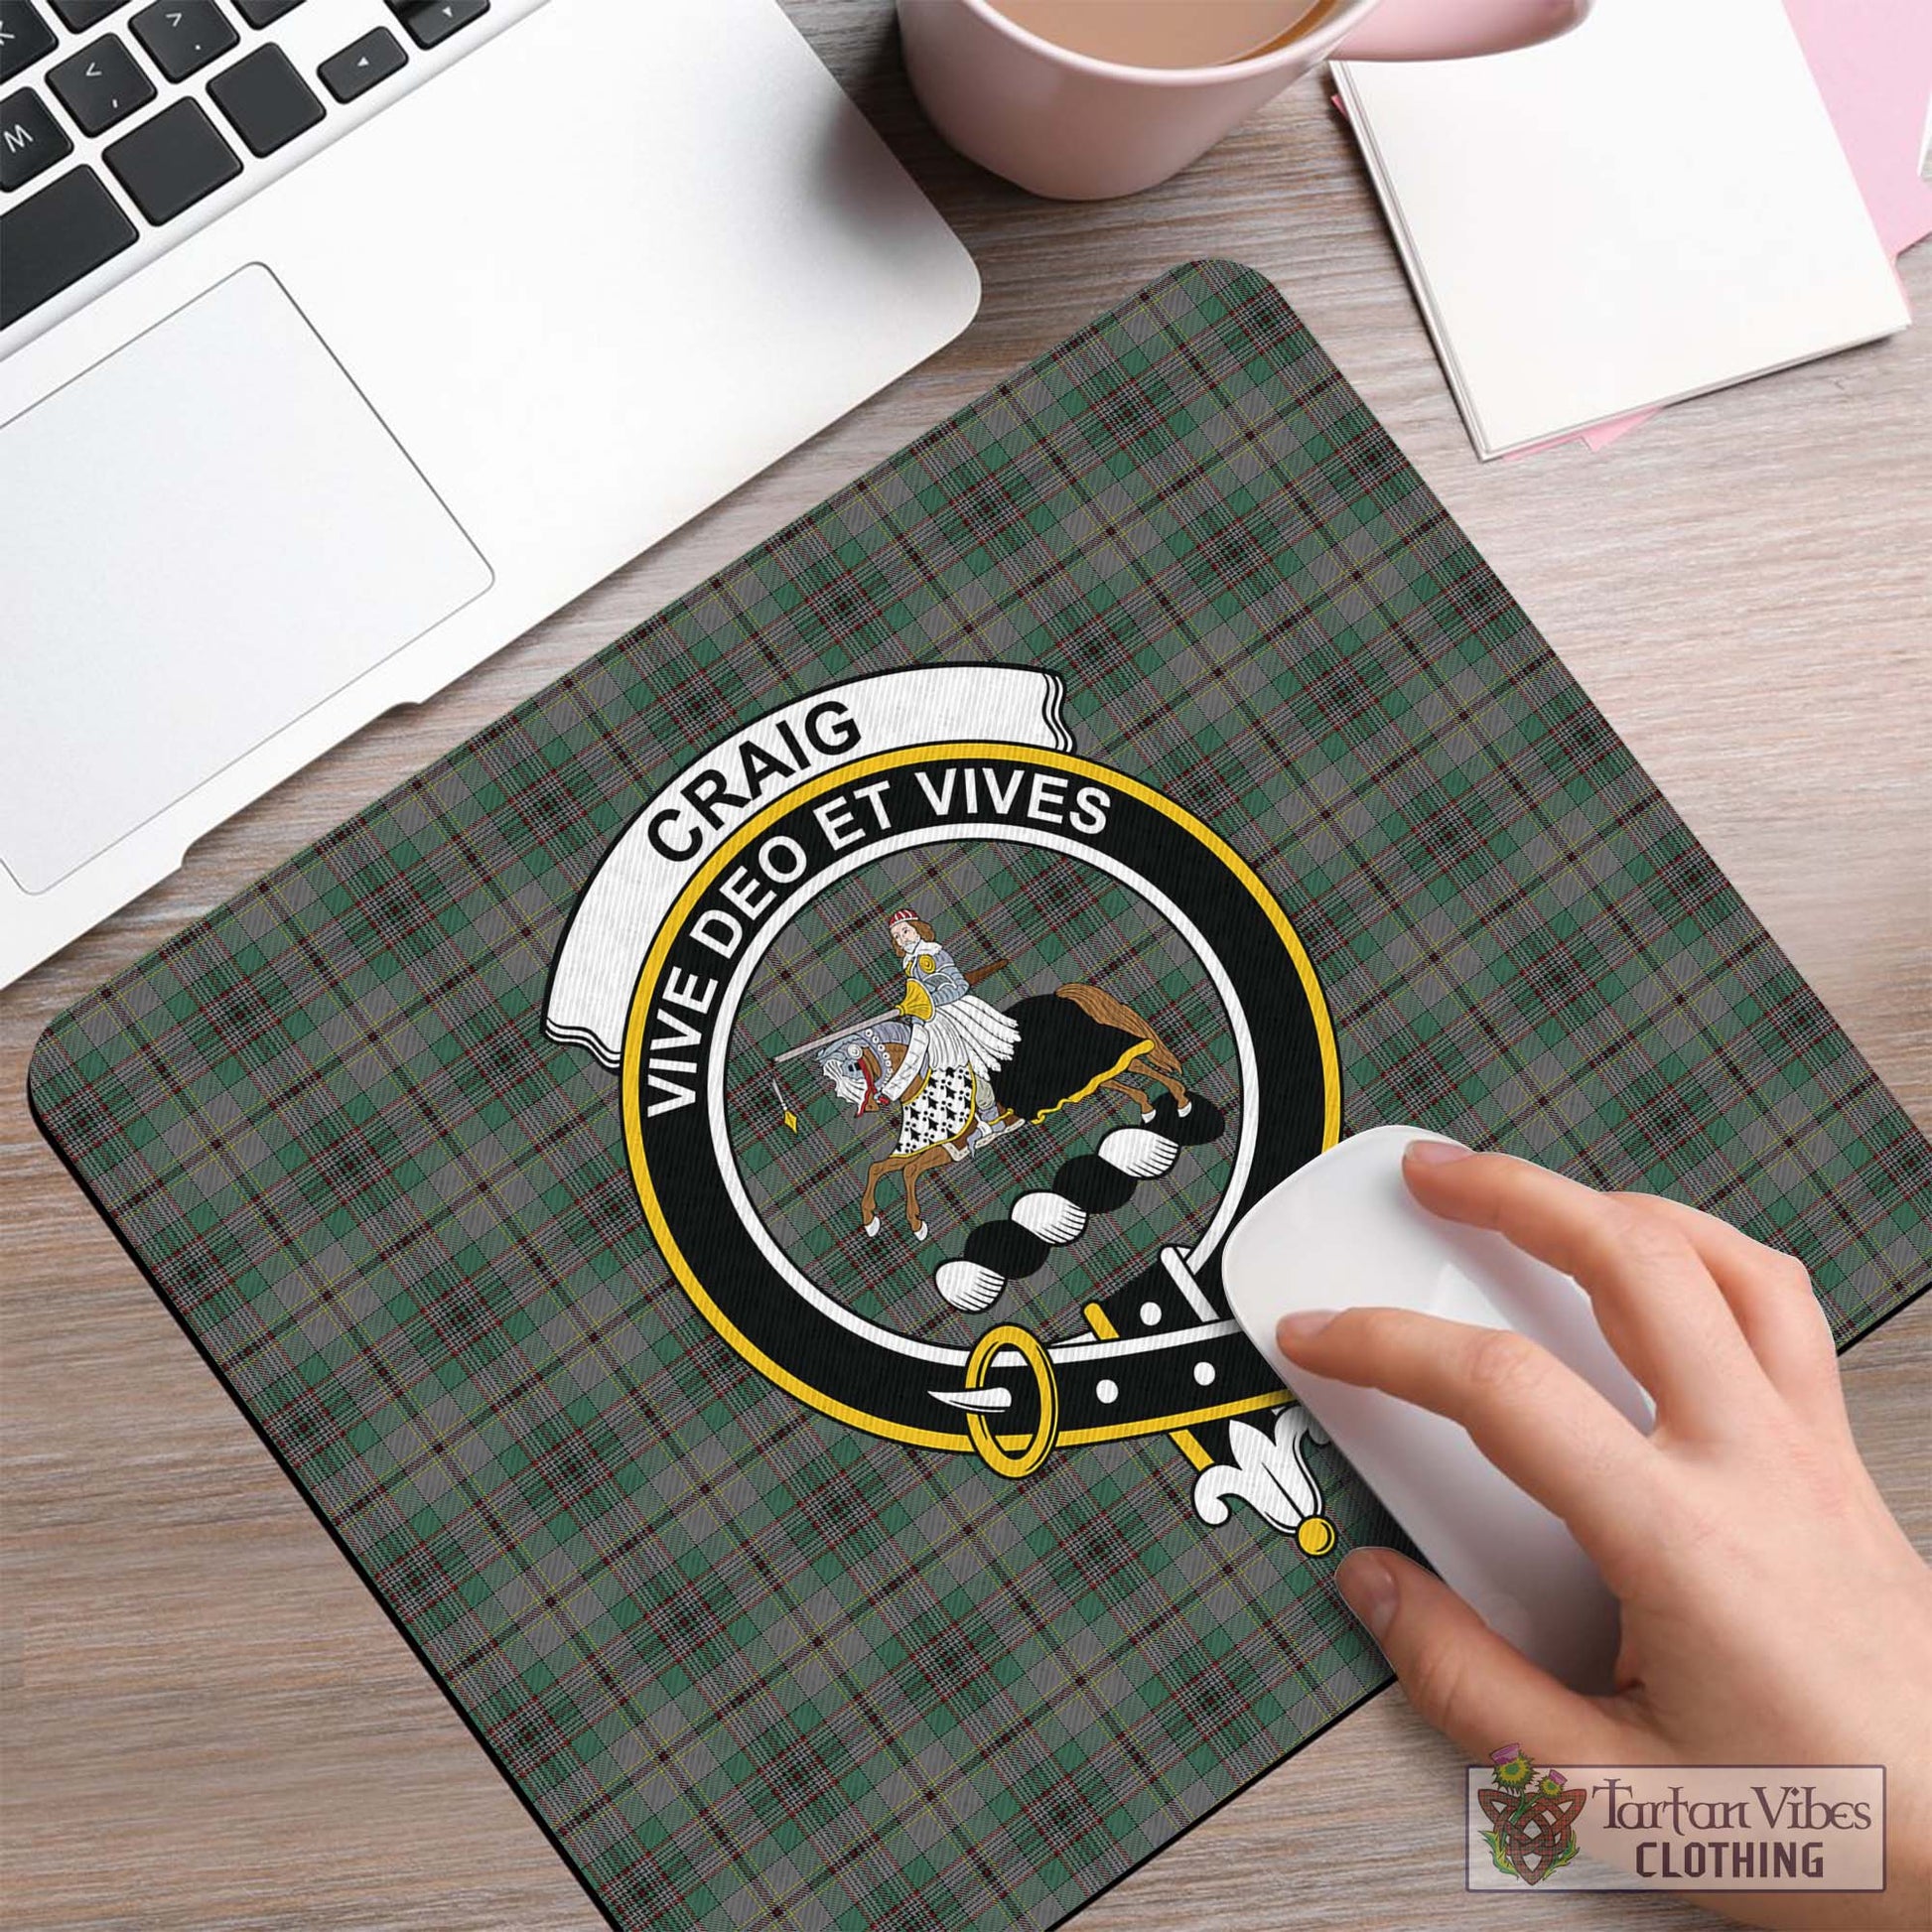 Tartan Vibes Clothing Craig Tartan Mouse Pad with Family Crest